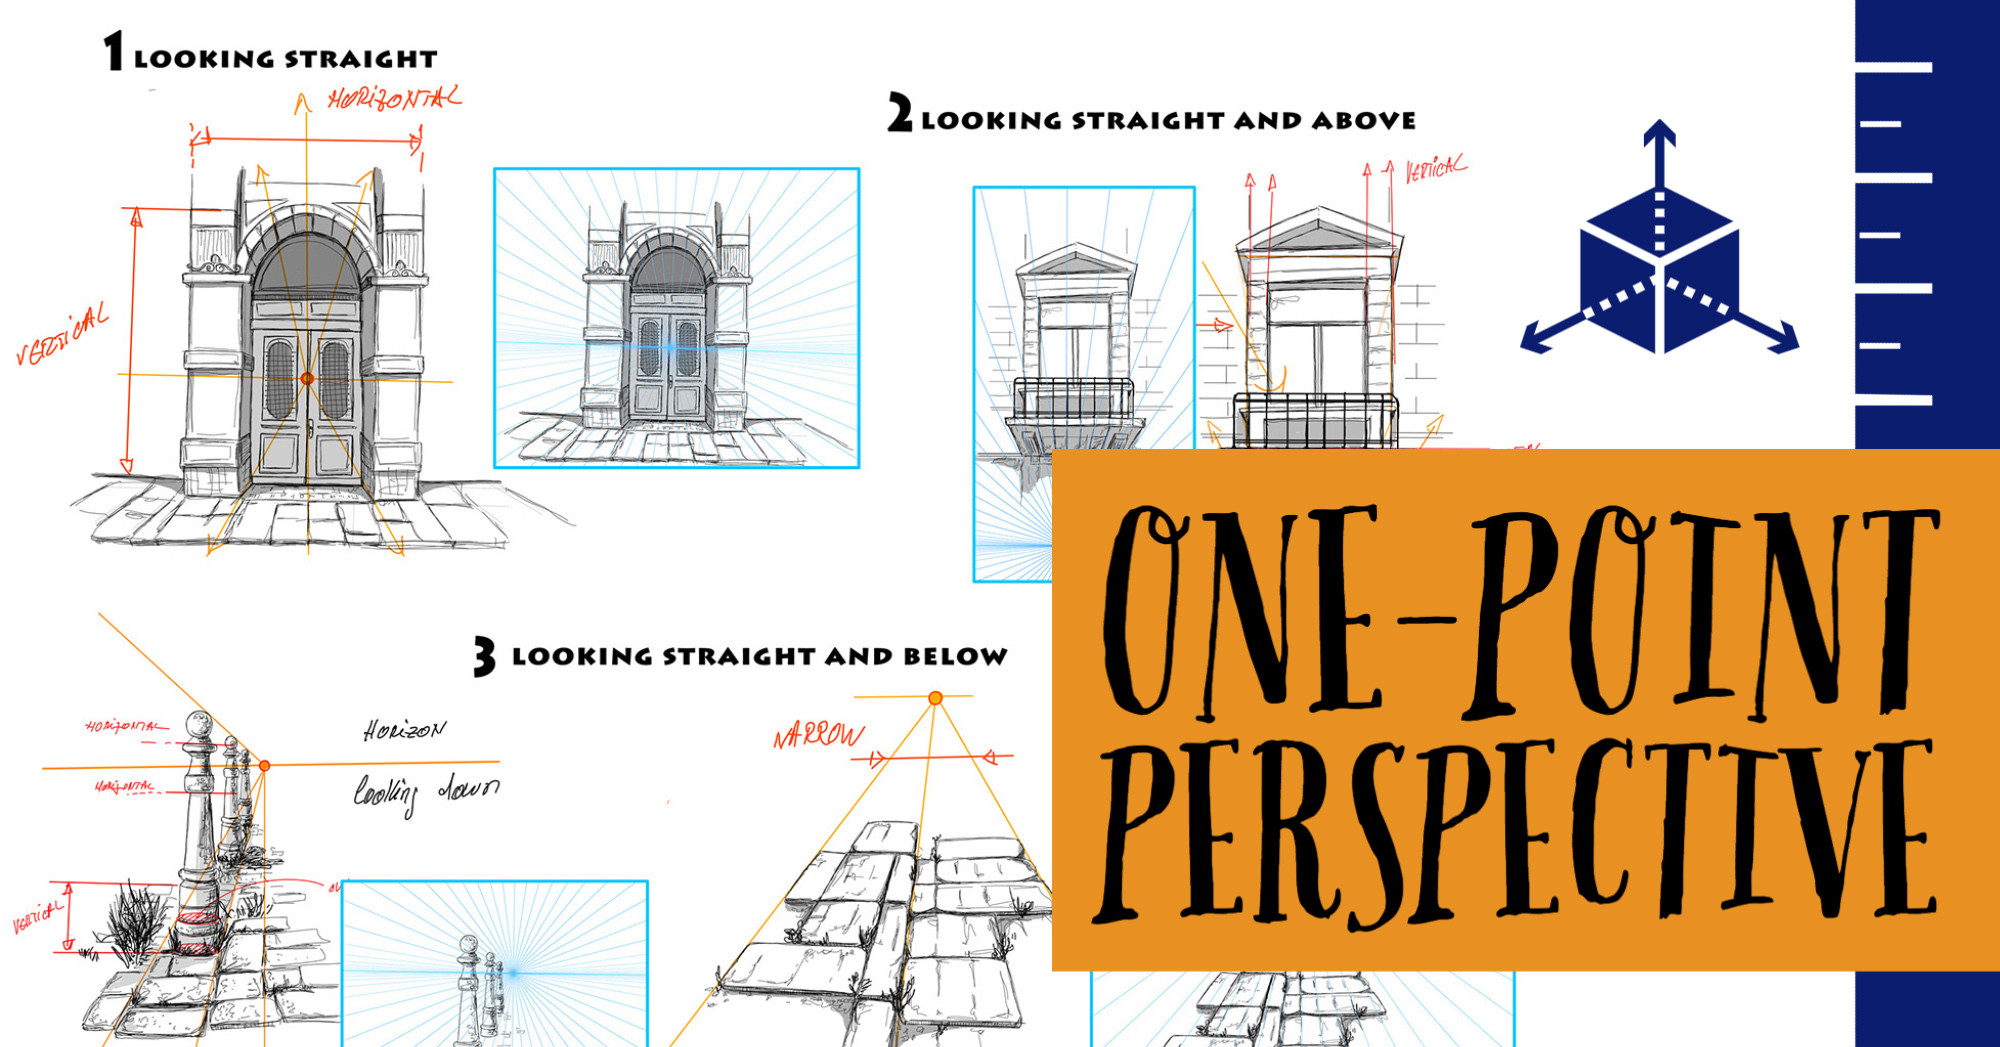 Article - Perspective Drawing Part 2. One-Point Perspective https://www.cristinateachingart.com/practical-guide-in-perspective-drawing-part-2-one-point-perspective-drawing/